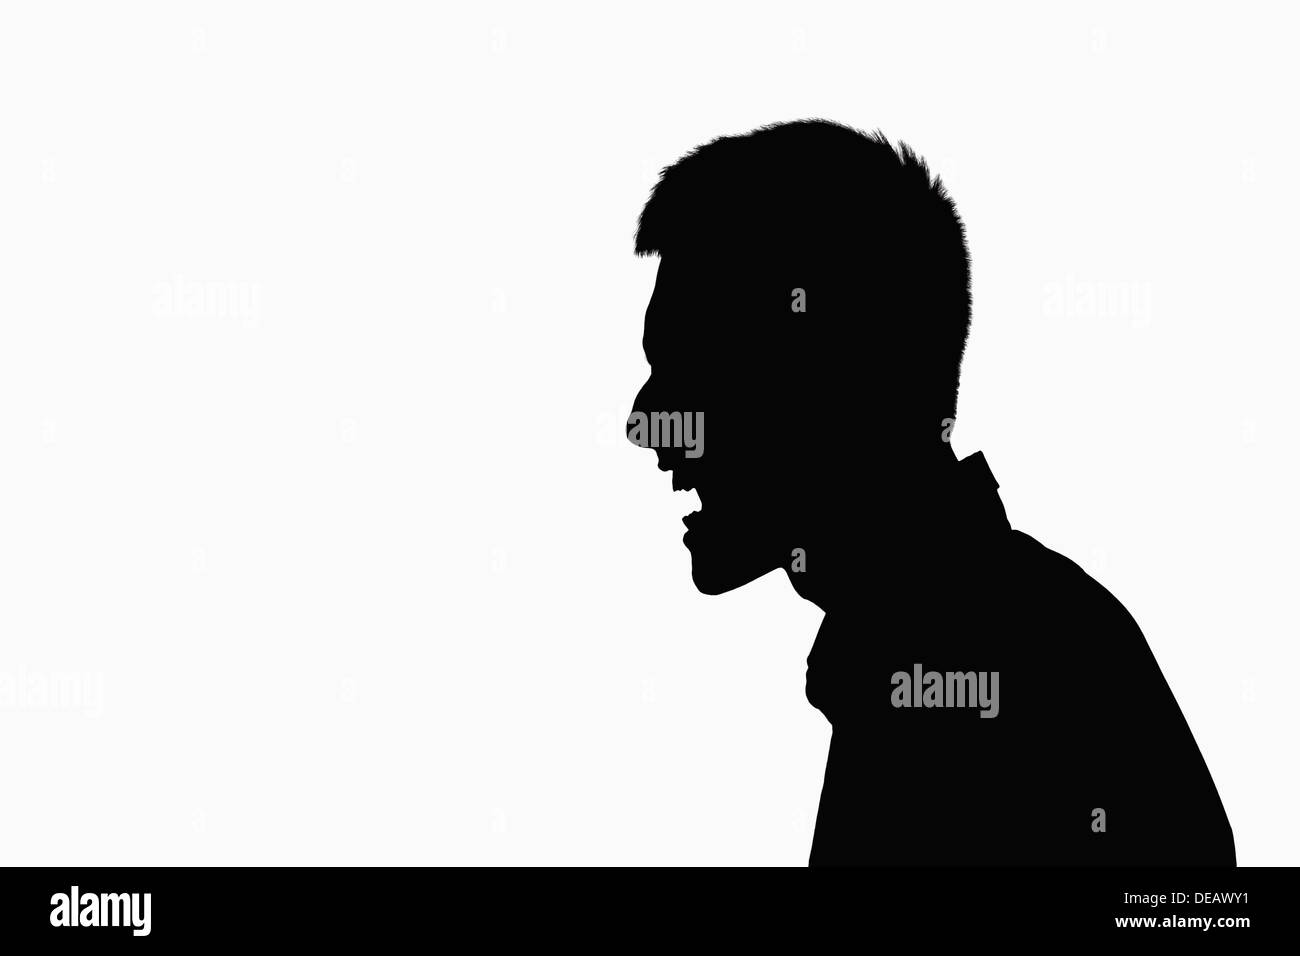 Silhouette of man screaming. Stock Photo